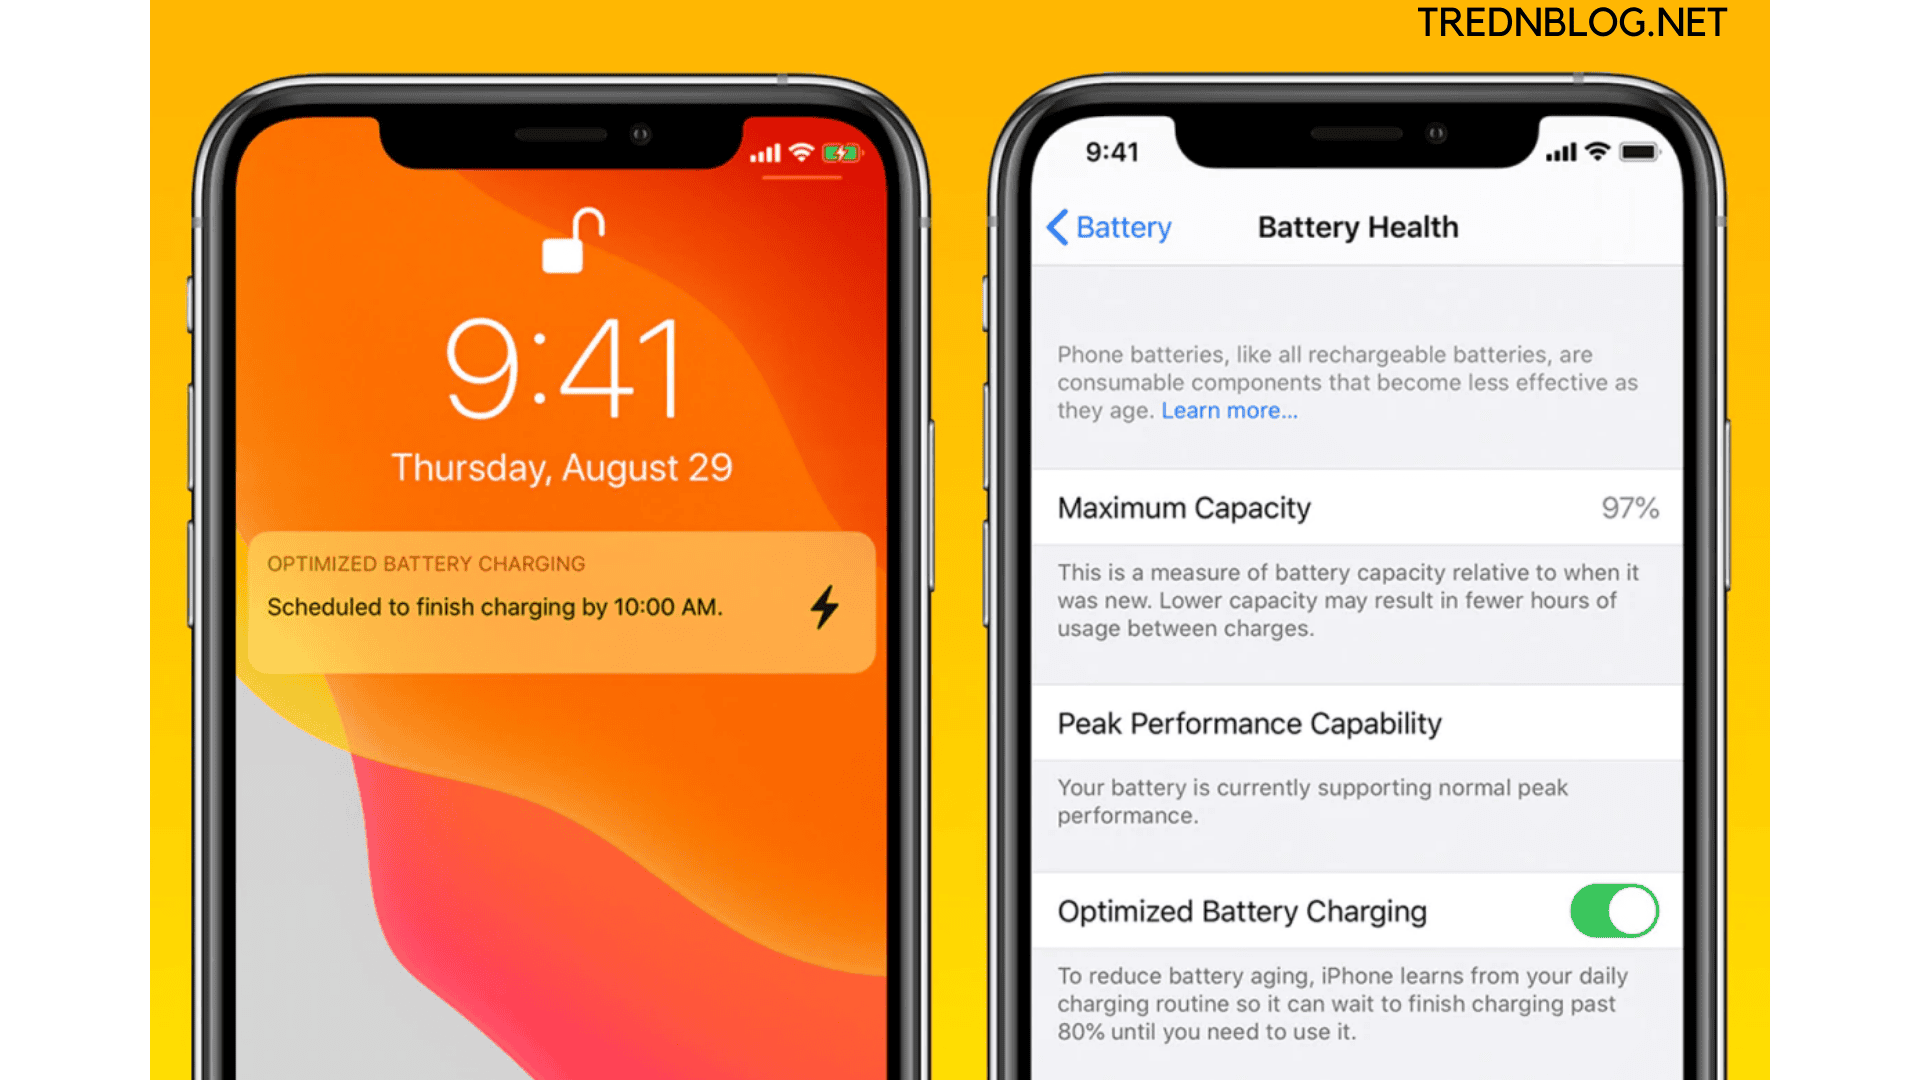  Turn Off Optimized Battery Charging on iPhone Within Minutes